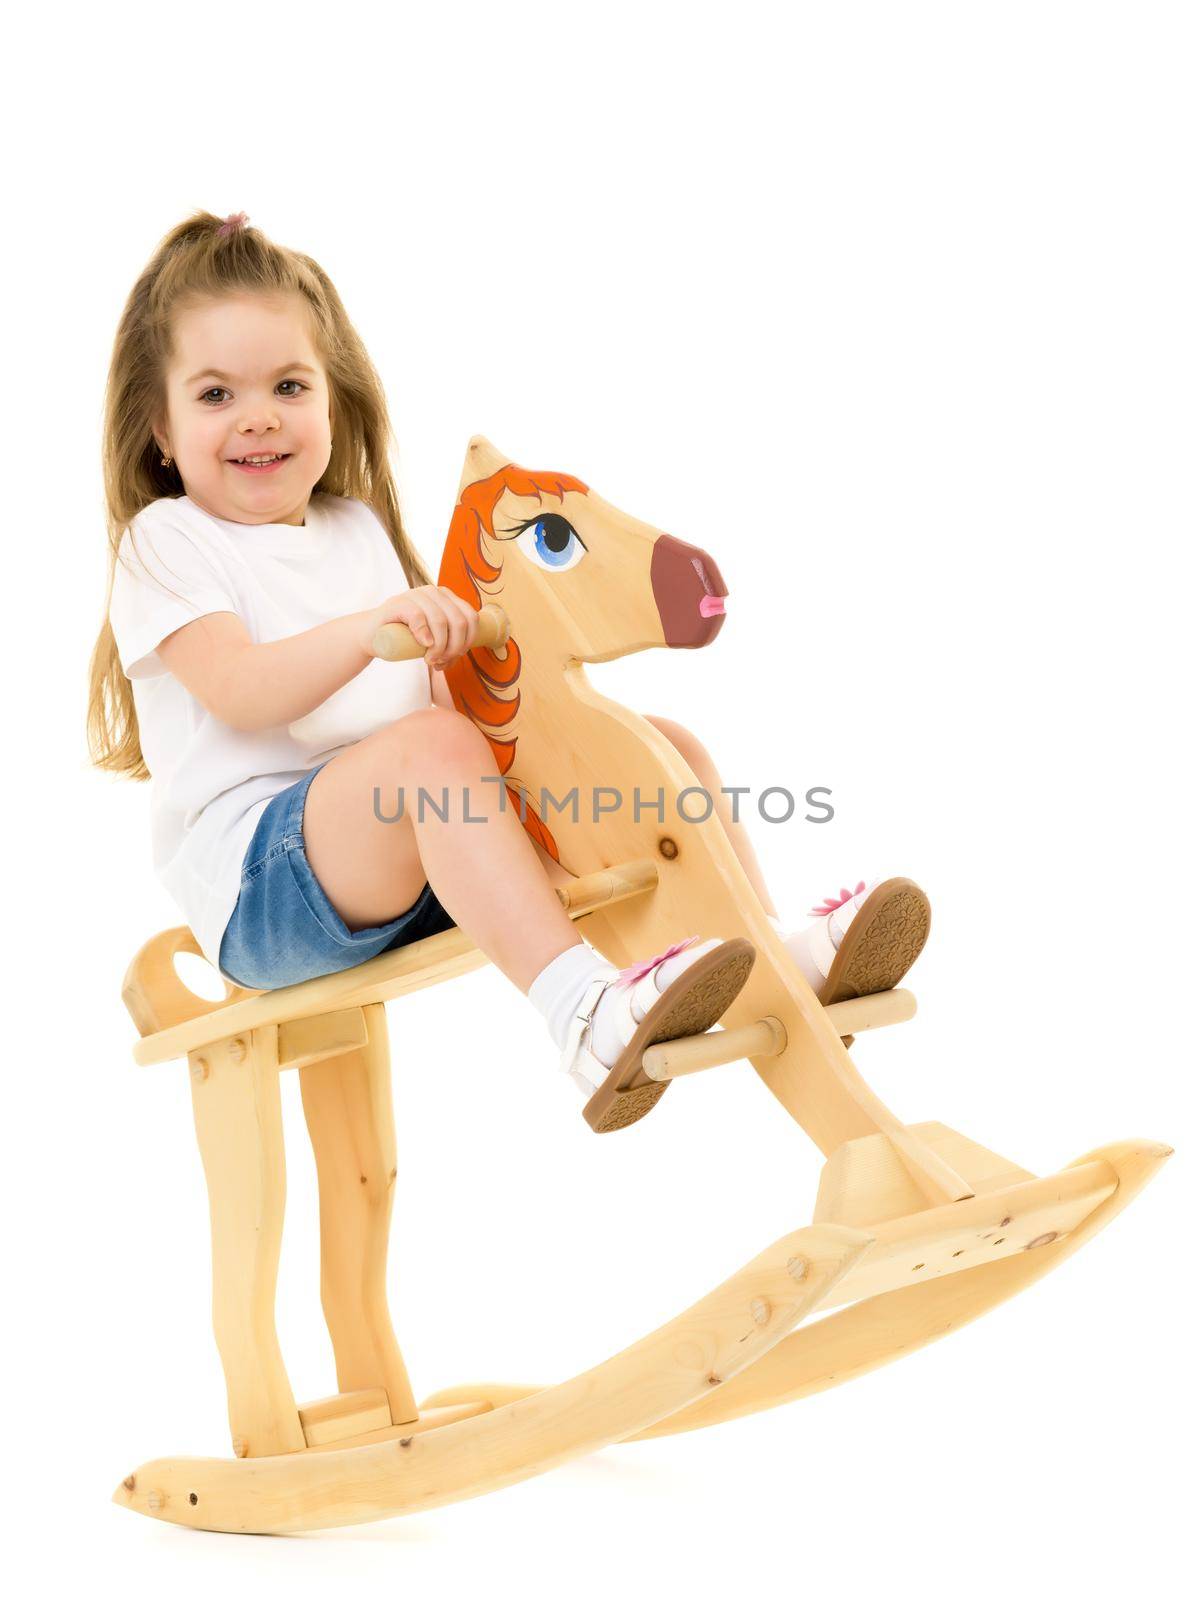 Little girl swinging on a wooden horse. The concept of a happy childhood, games in kindergarten and in the family. Isolated against white background.